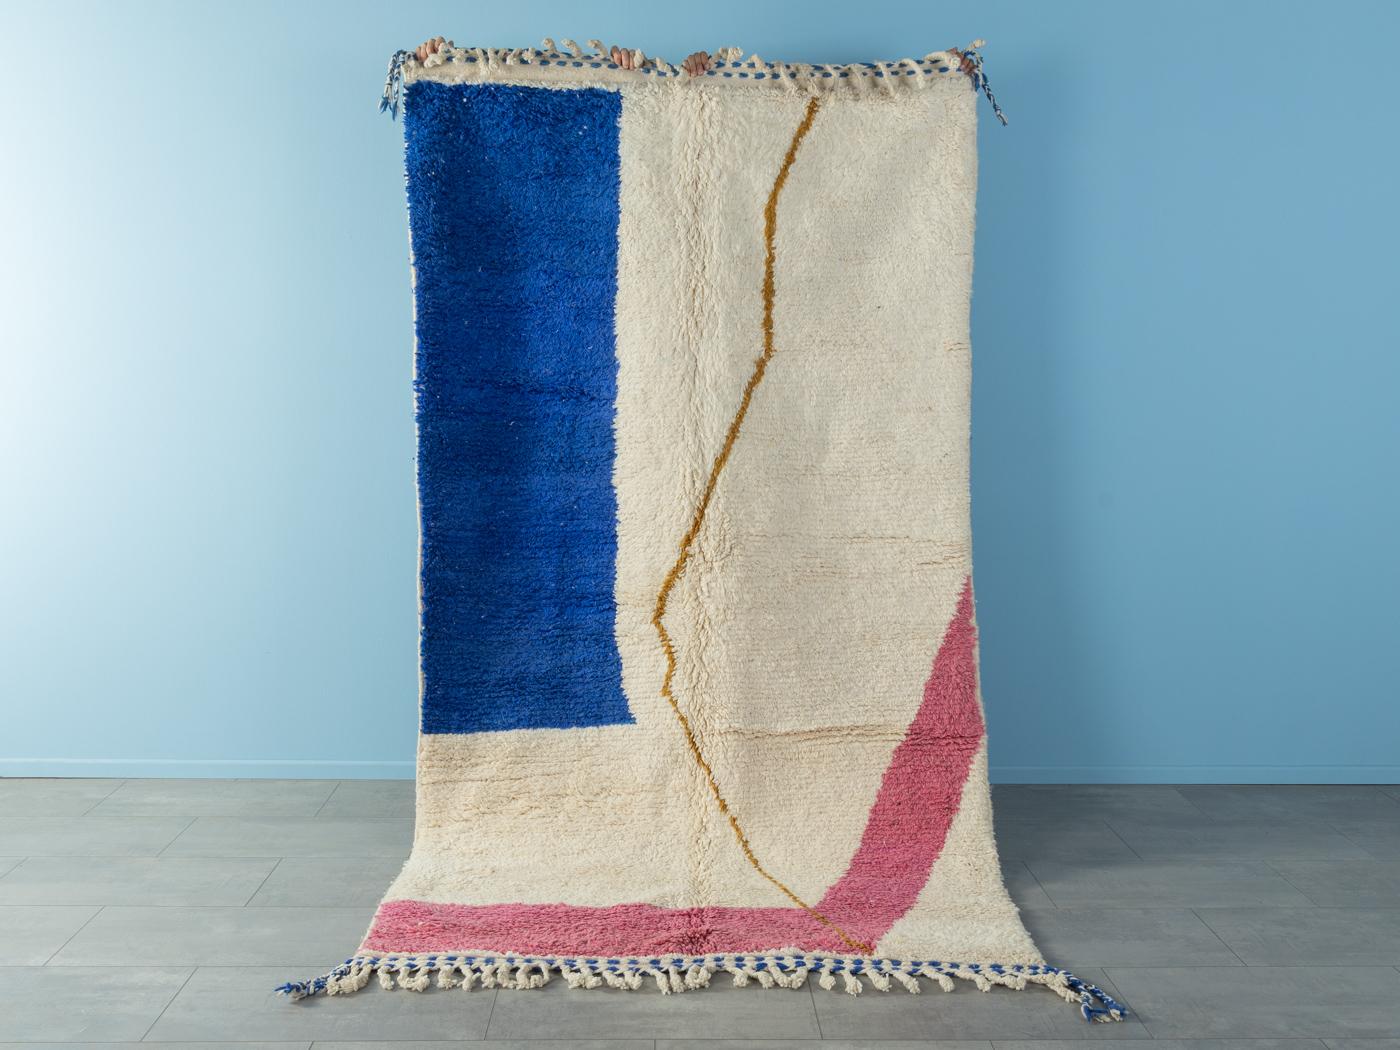 Abstraction IV is a contemporary 100% wool rug – thick and soft, comfortable underfoot. Our Berber rugs are handwoven and handknotted by Amazigh women in the Atlas Mountains. These communities have been crafting rugs for thousands of years. One knot